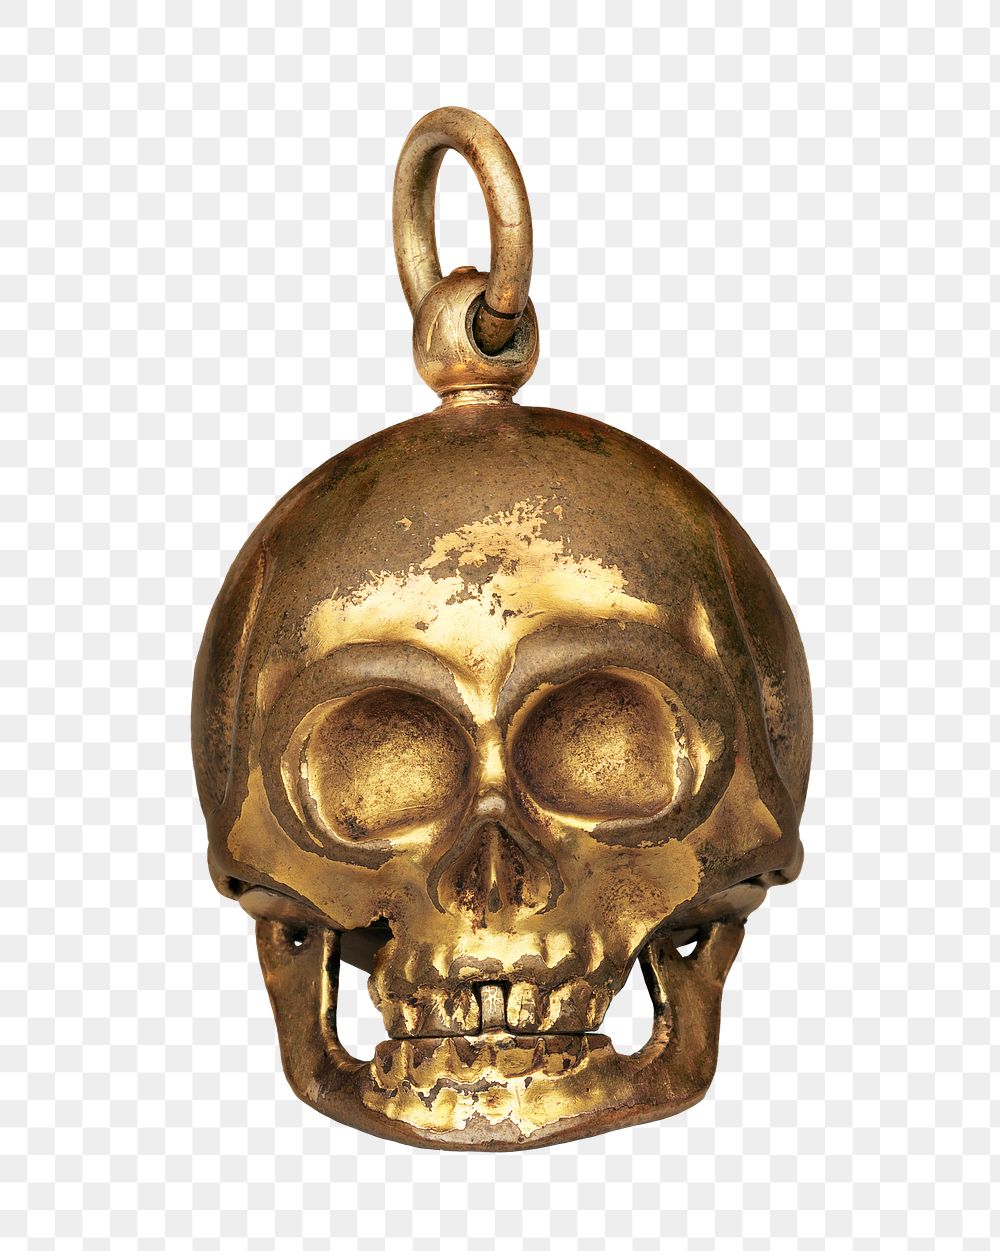 Gold skull png, vintage object illustration on transparent background. Remixed by rawpixel.